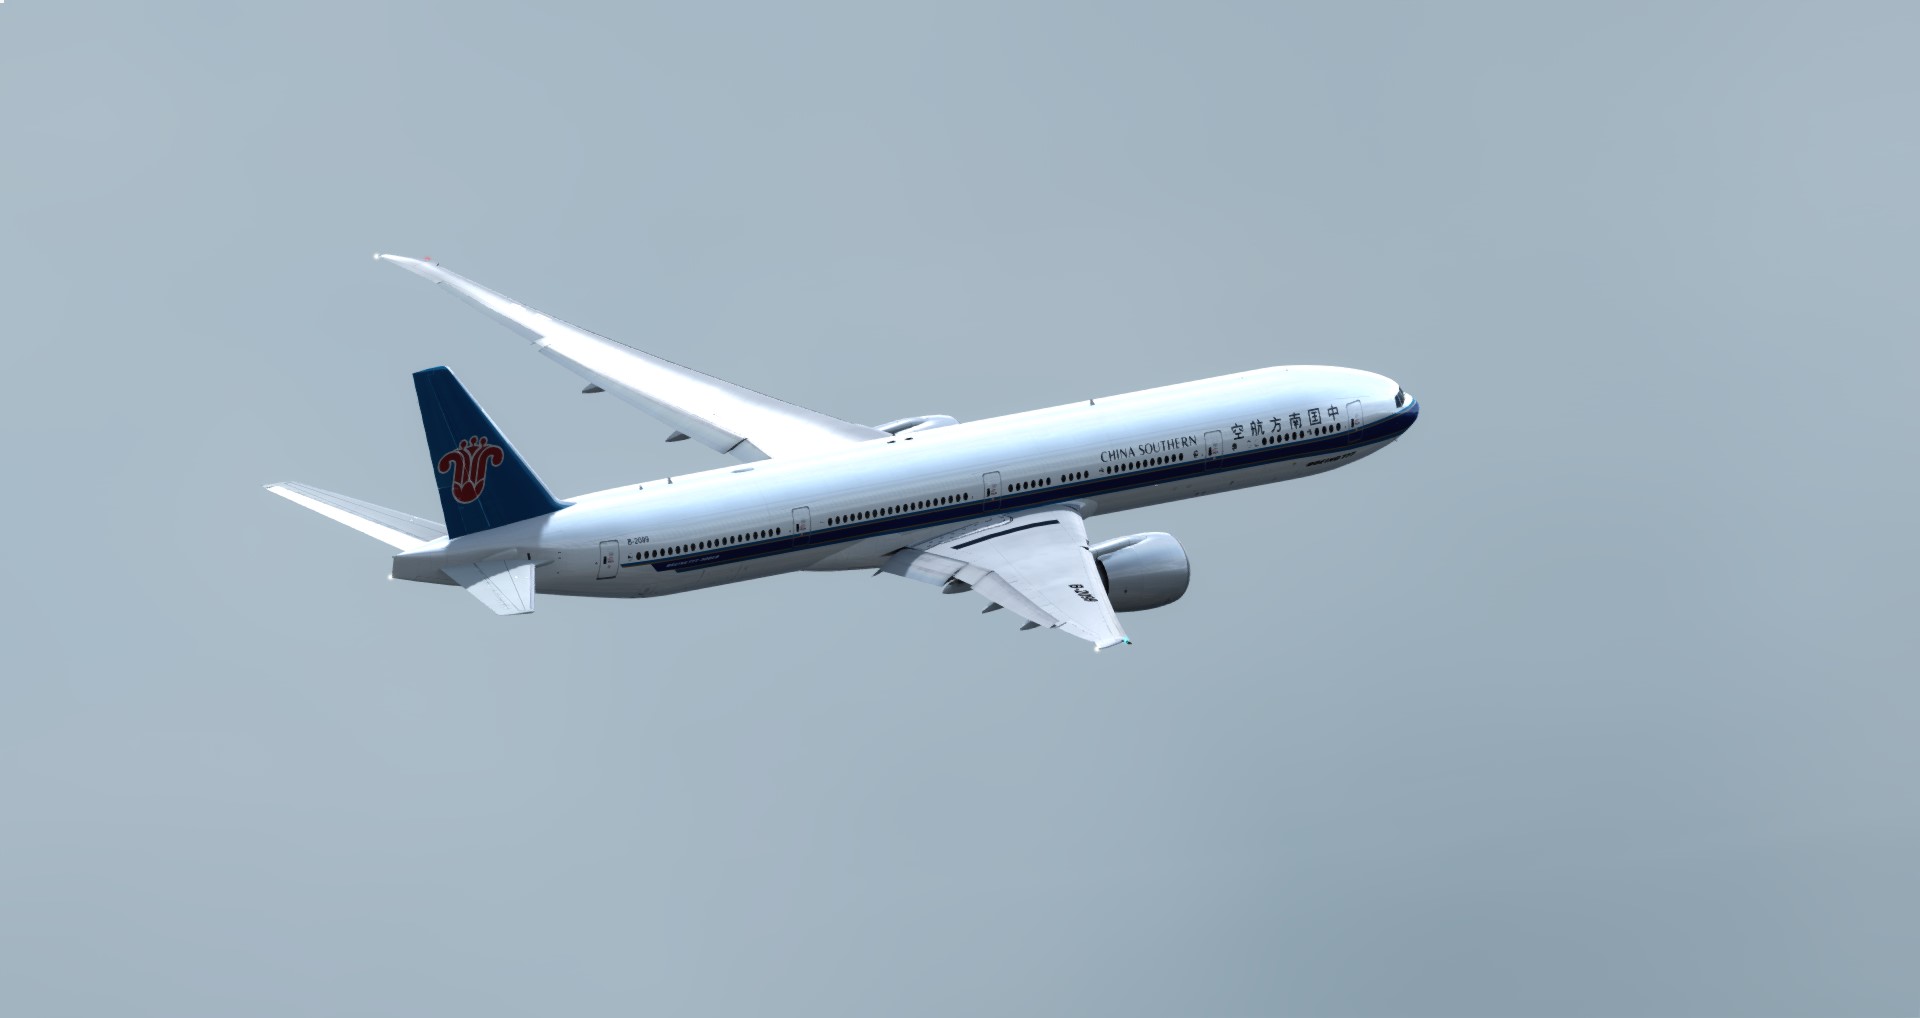 P3D V4 77W China Southern Airlines WADD-ZGGG 营救同胞-8191 